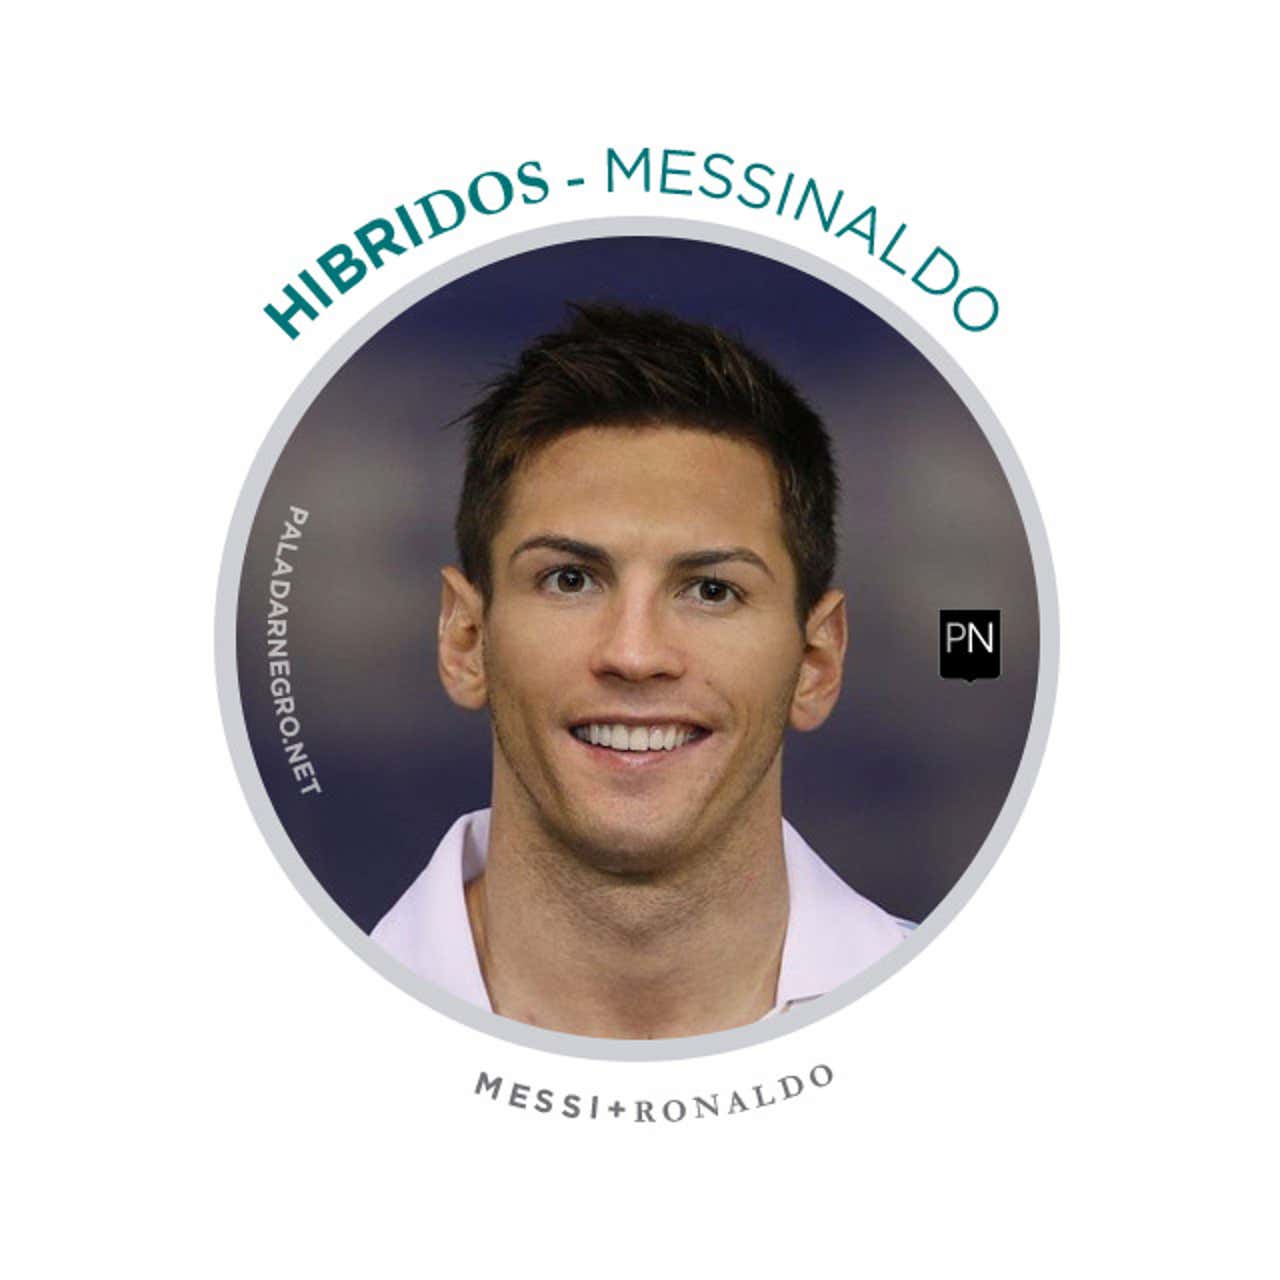 Image of messi and ronaldo mixed together